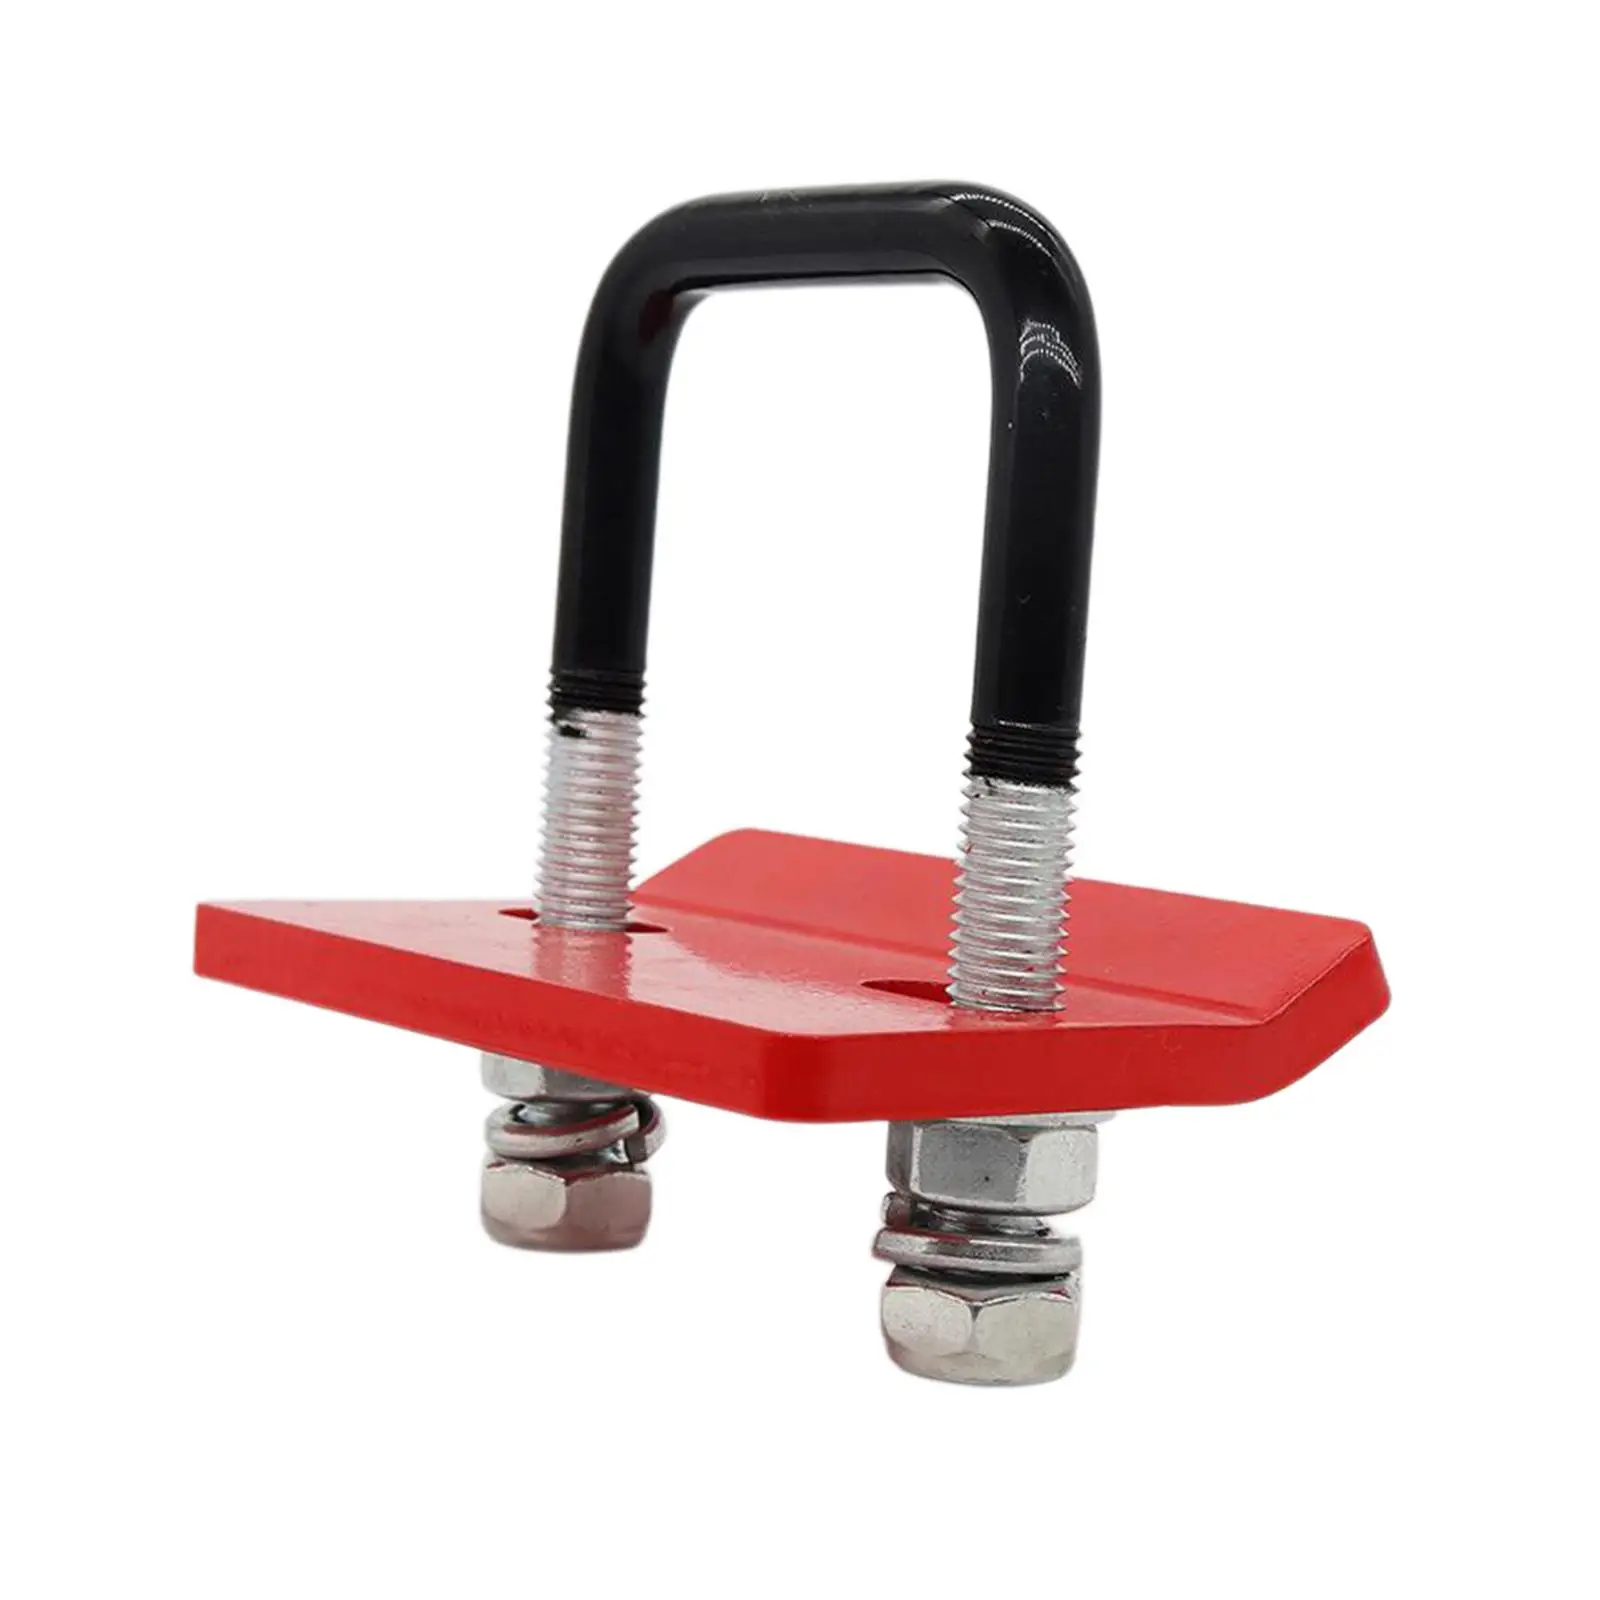 Alloy Steel Hitch Tightener Heavy Duty Universal Accessories Lock Down Tow Clamp for Hitch Tray Boat Trailer Ball Mount